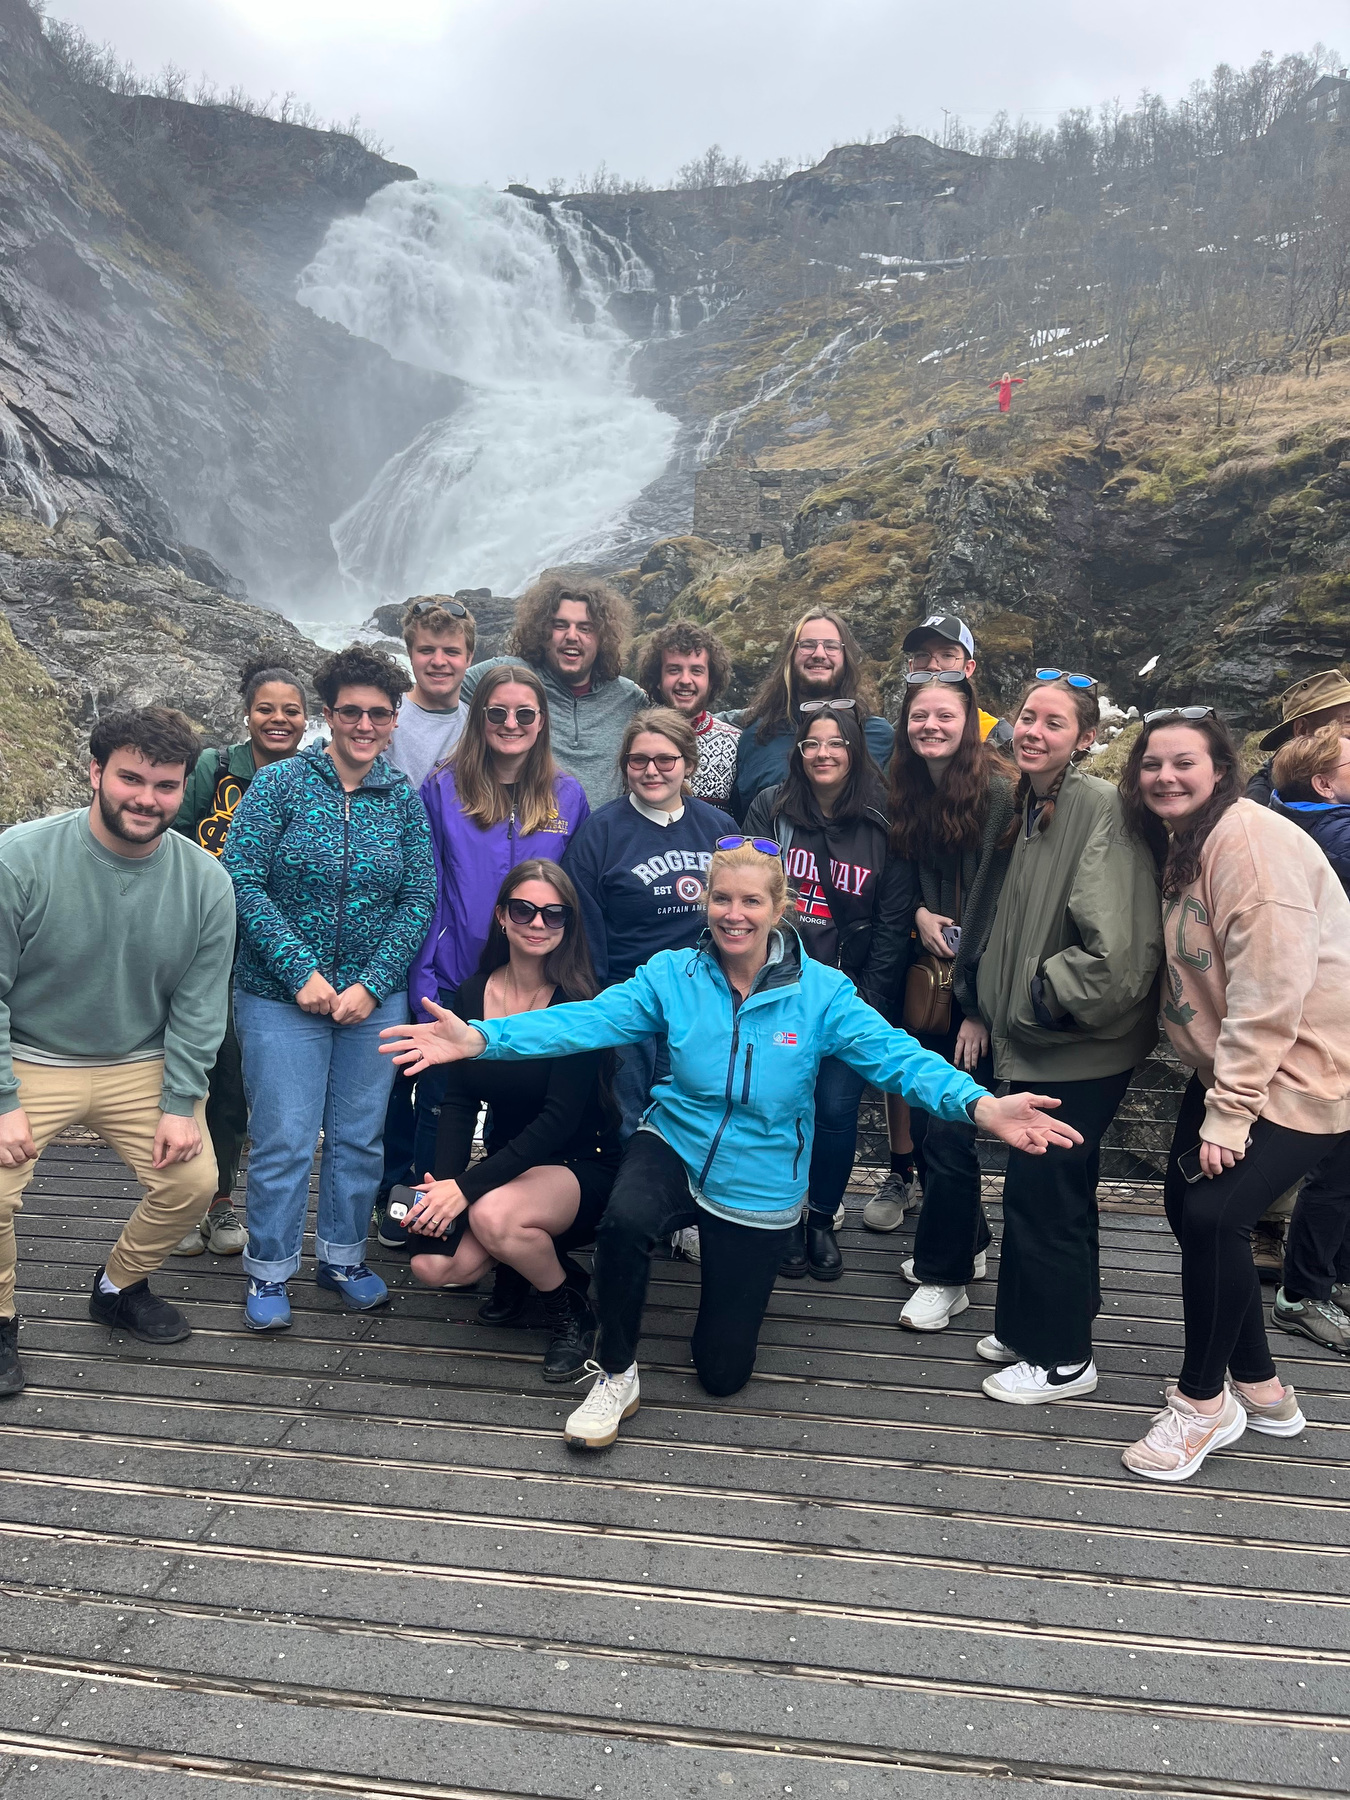 Creative writing professor Juliet Giglio and her class traveled to Norway as part of a “Norse Mythology” course, which included a week-long trip to Oslo and Bergen.